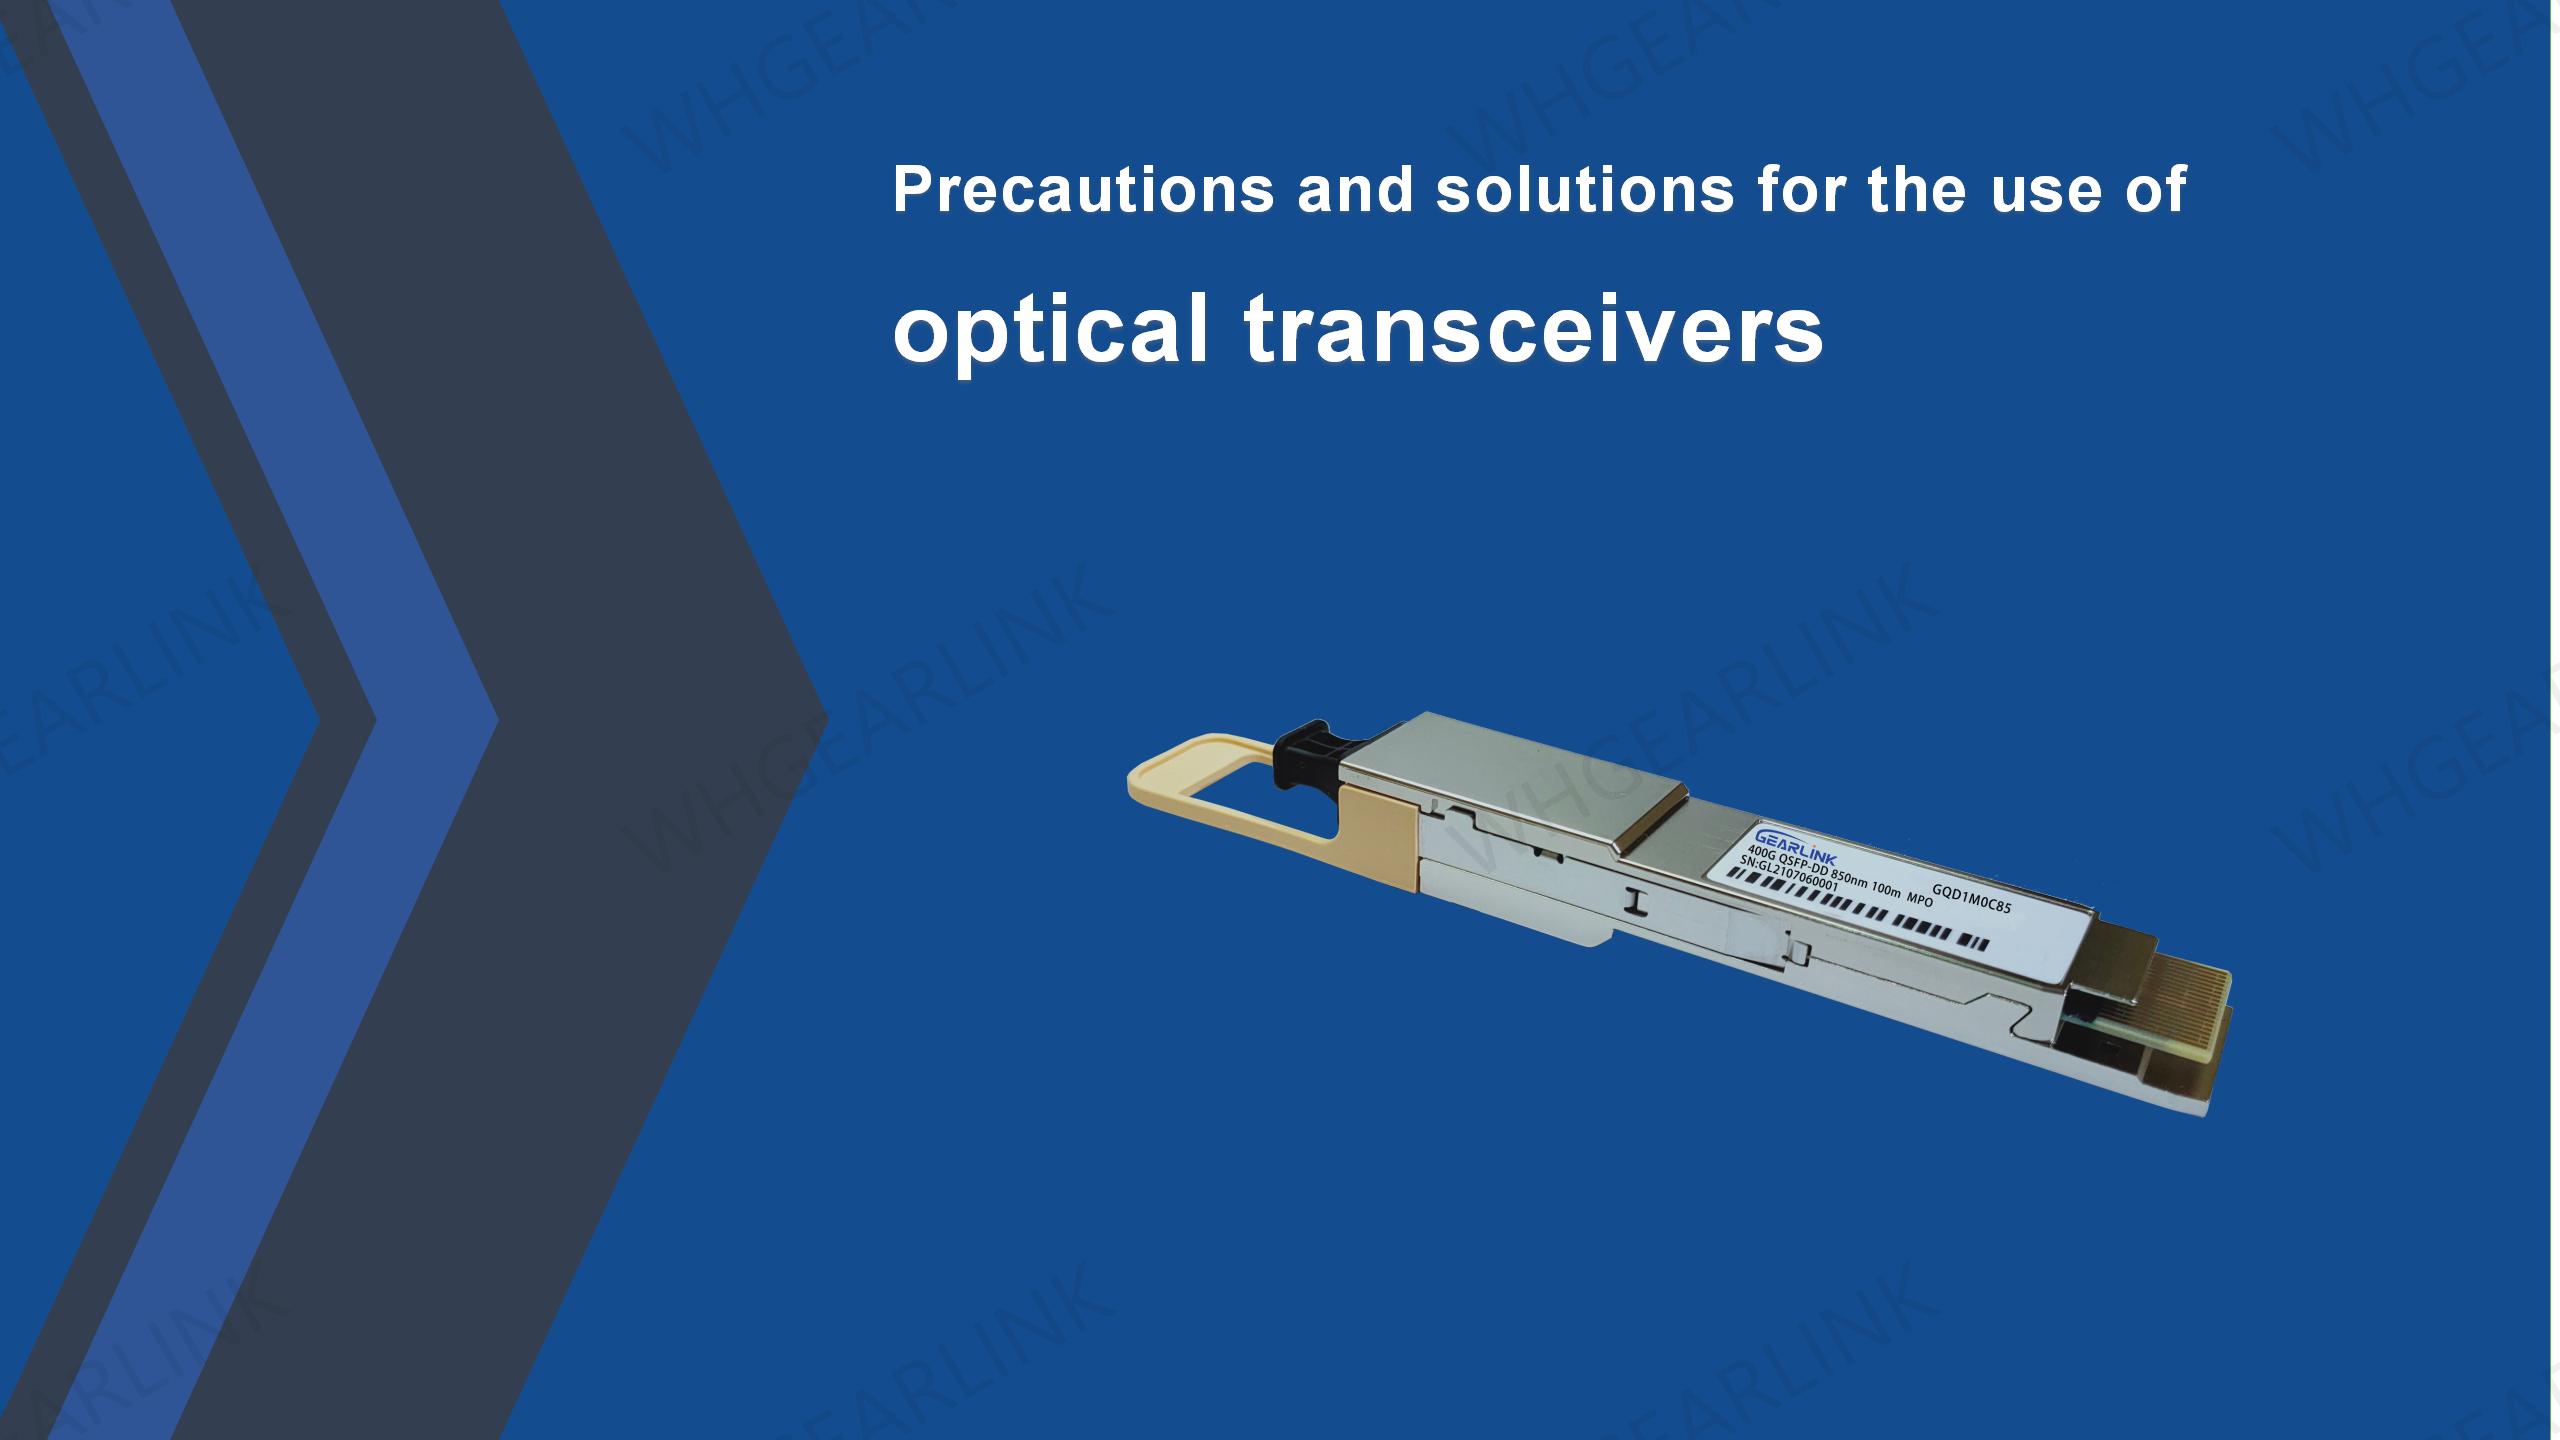 precautions-and-solutions-for-the-use-of-optical-transceivers.jpg